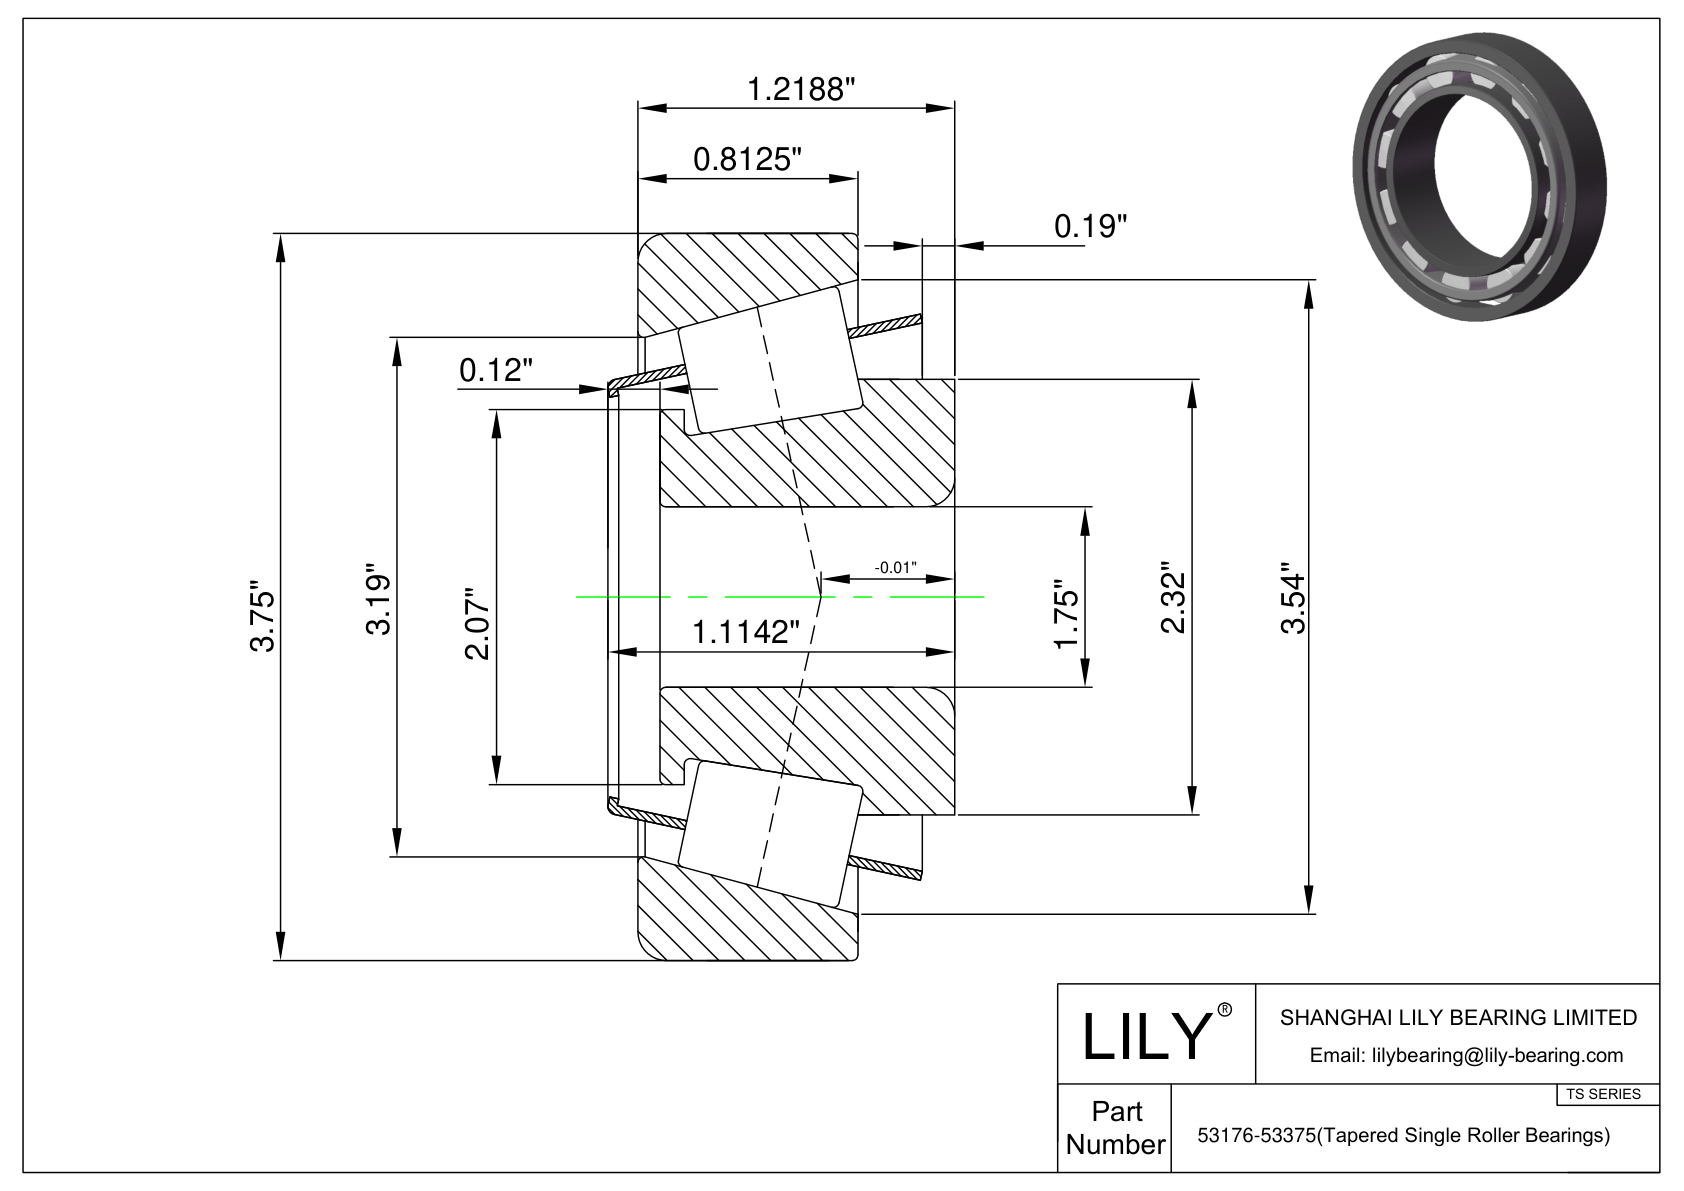 53176-53375 TS (Tapered Single Roller Bearings) (Imperial) cad drawing